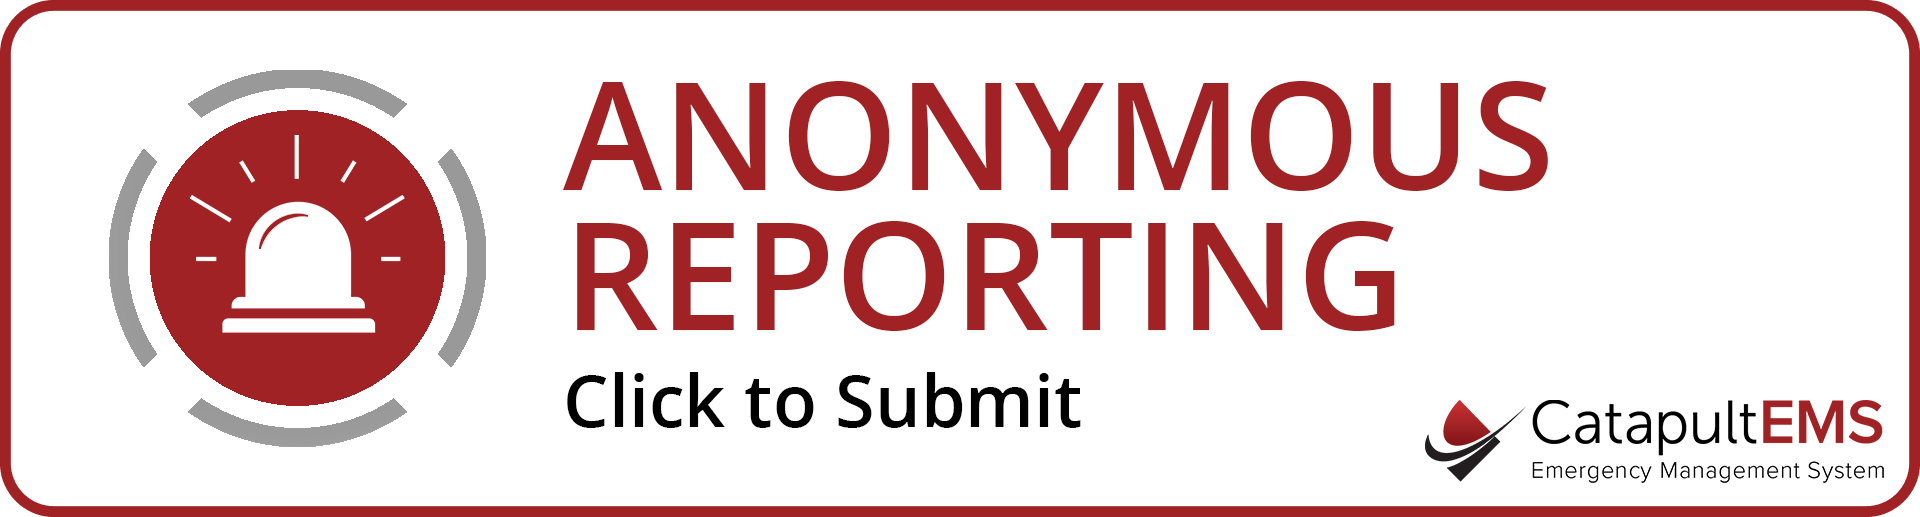 Anonymous Reporting. Click To Submit. CatapultEMS - Emergency Management System